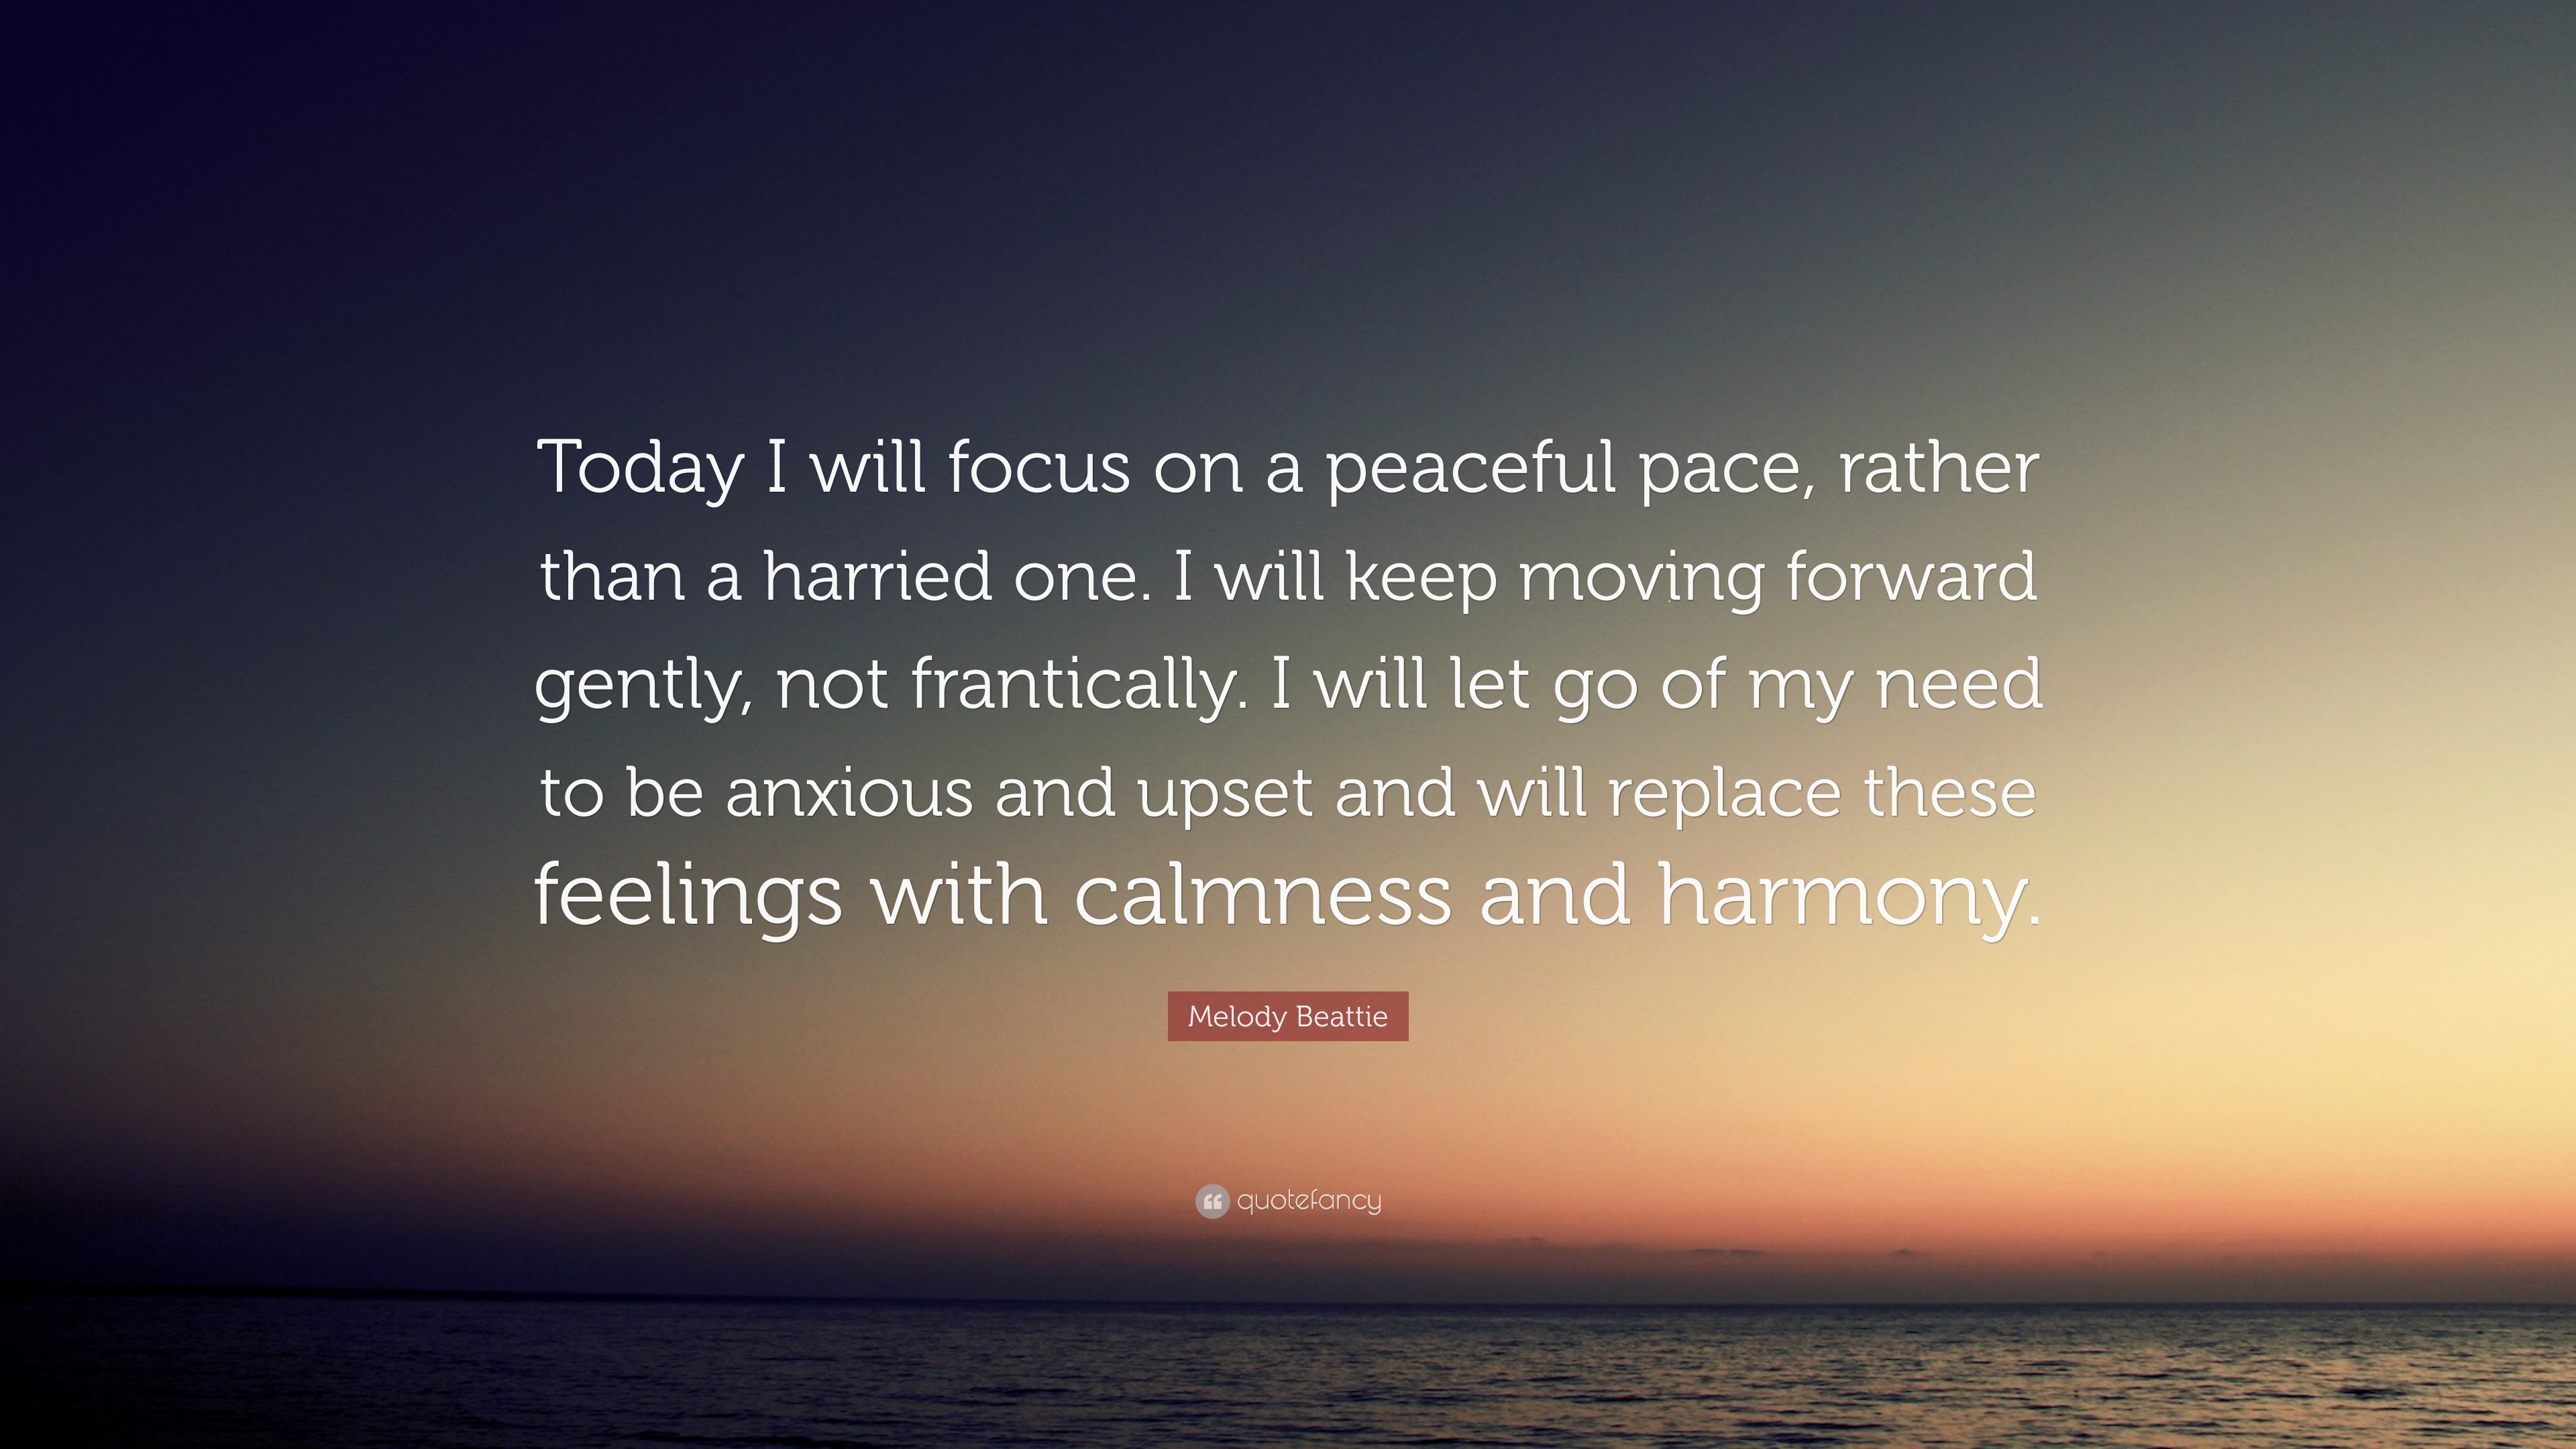 Melody Beattie Quote: “Today I will focus on a peaceful pace, rather ...